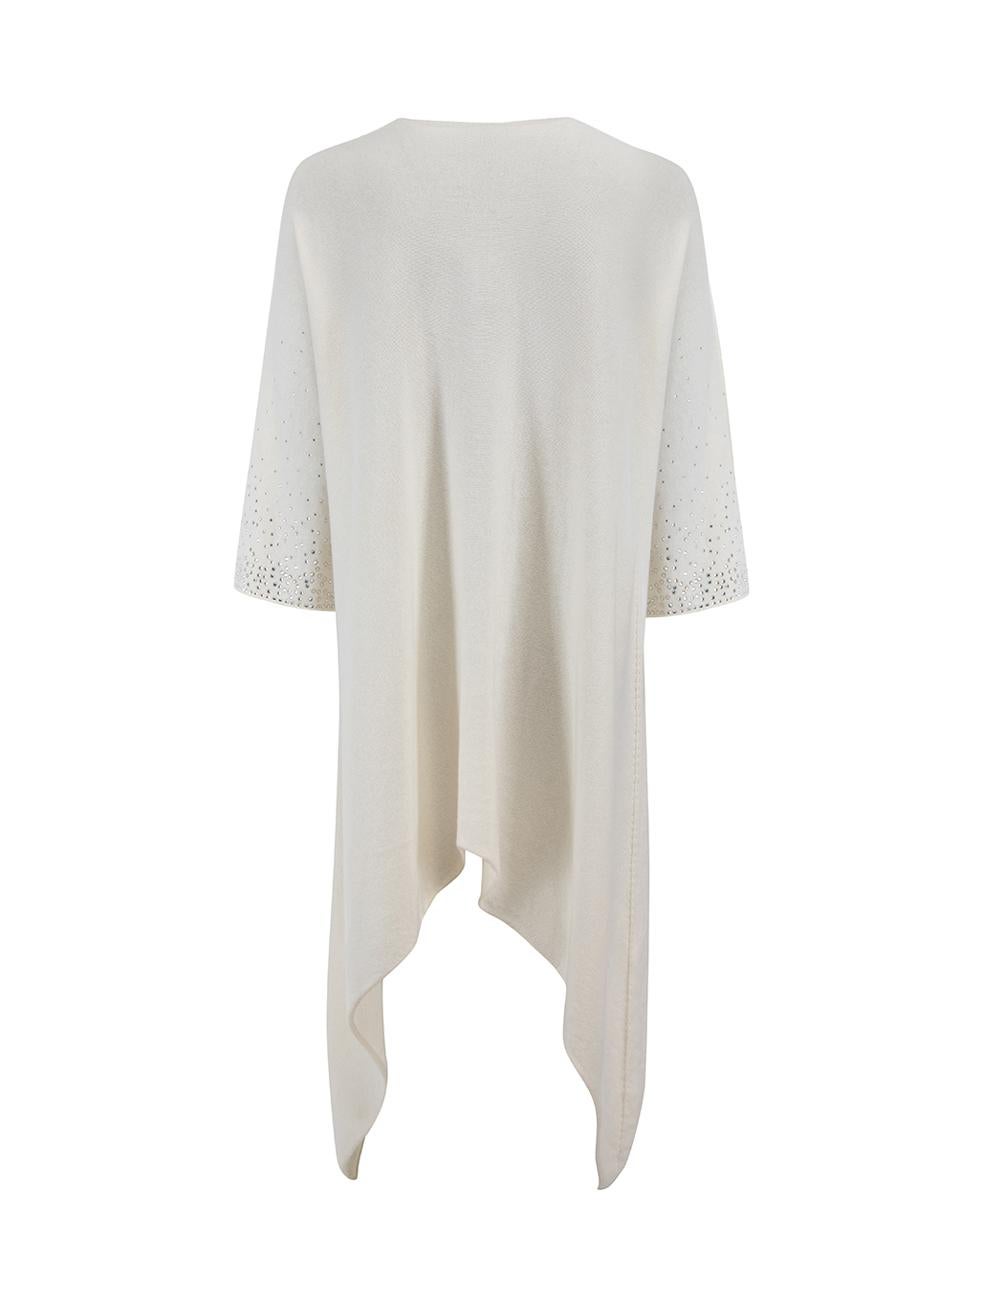 CONDITION is Never Worn. No visible wear to top is evident on this used Harrods designer resale item. Details Cream Cashmere Knit jumper Round neckline Mid sleeves with gemstone embellished detail Handkerchief hemline Made in Scotland Composition